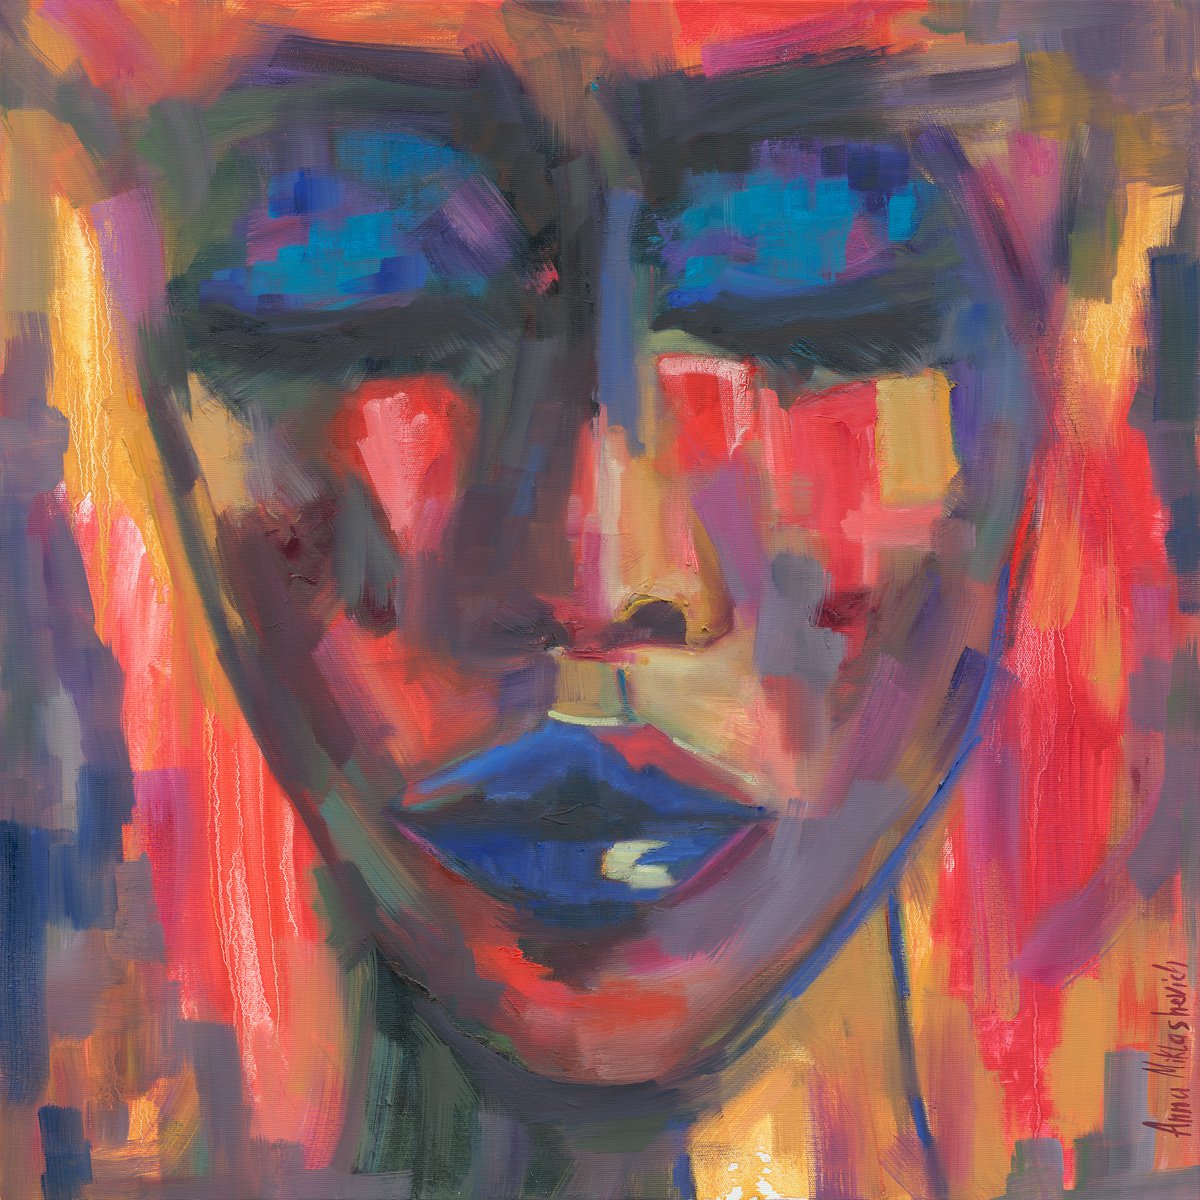 IMPERFECTION / abstract colorful face portrait by Anna Miklashevich